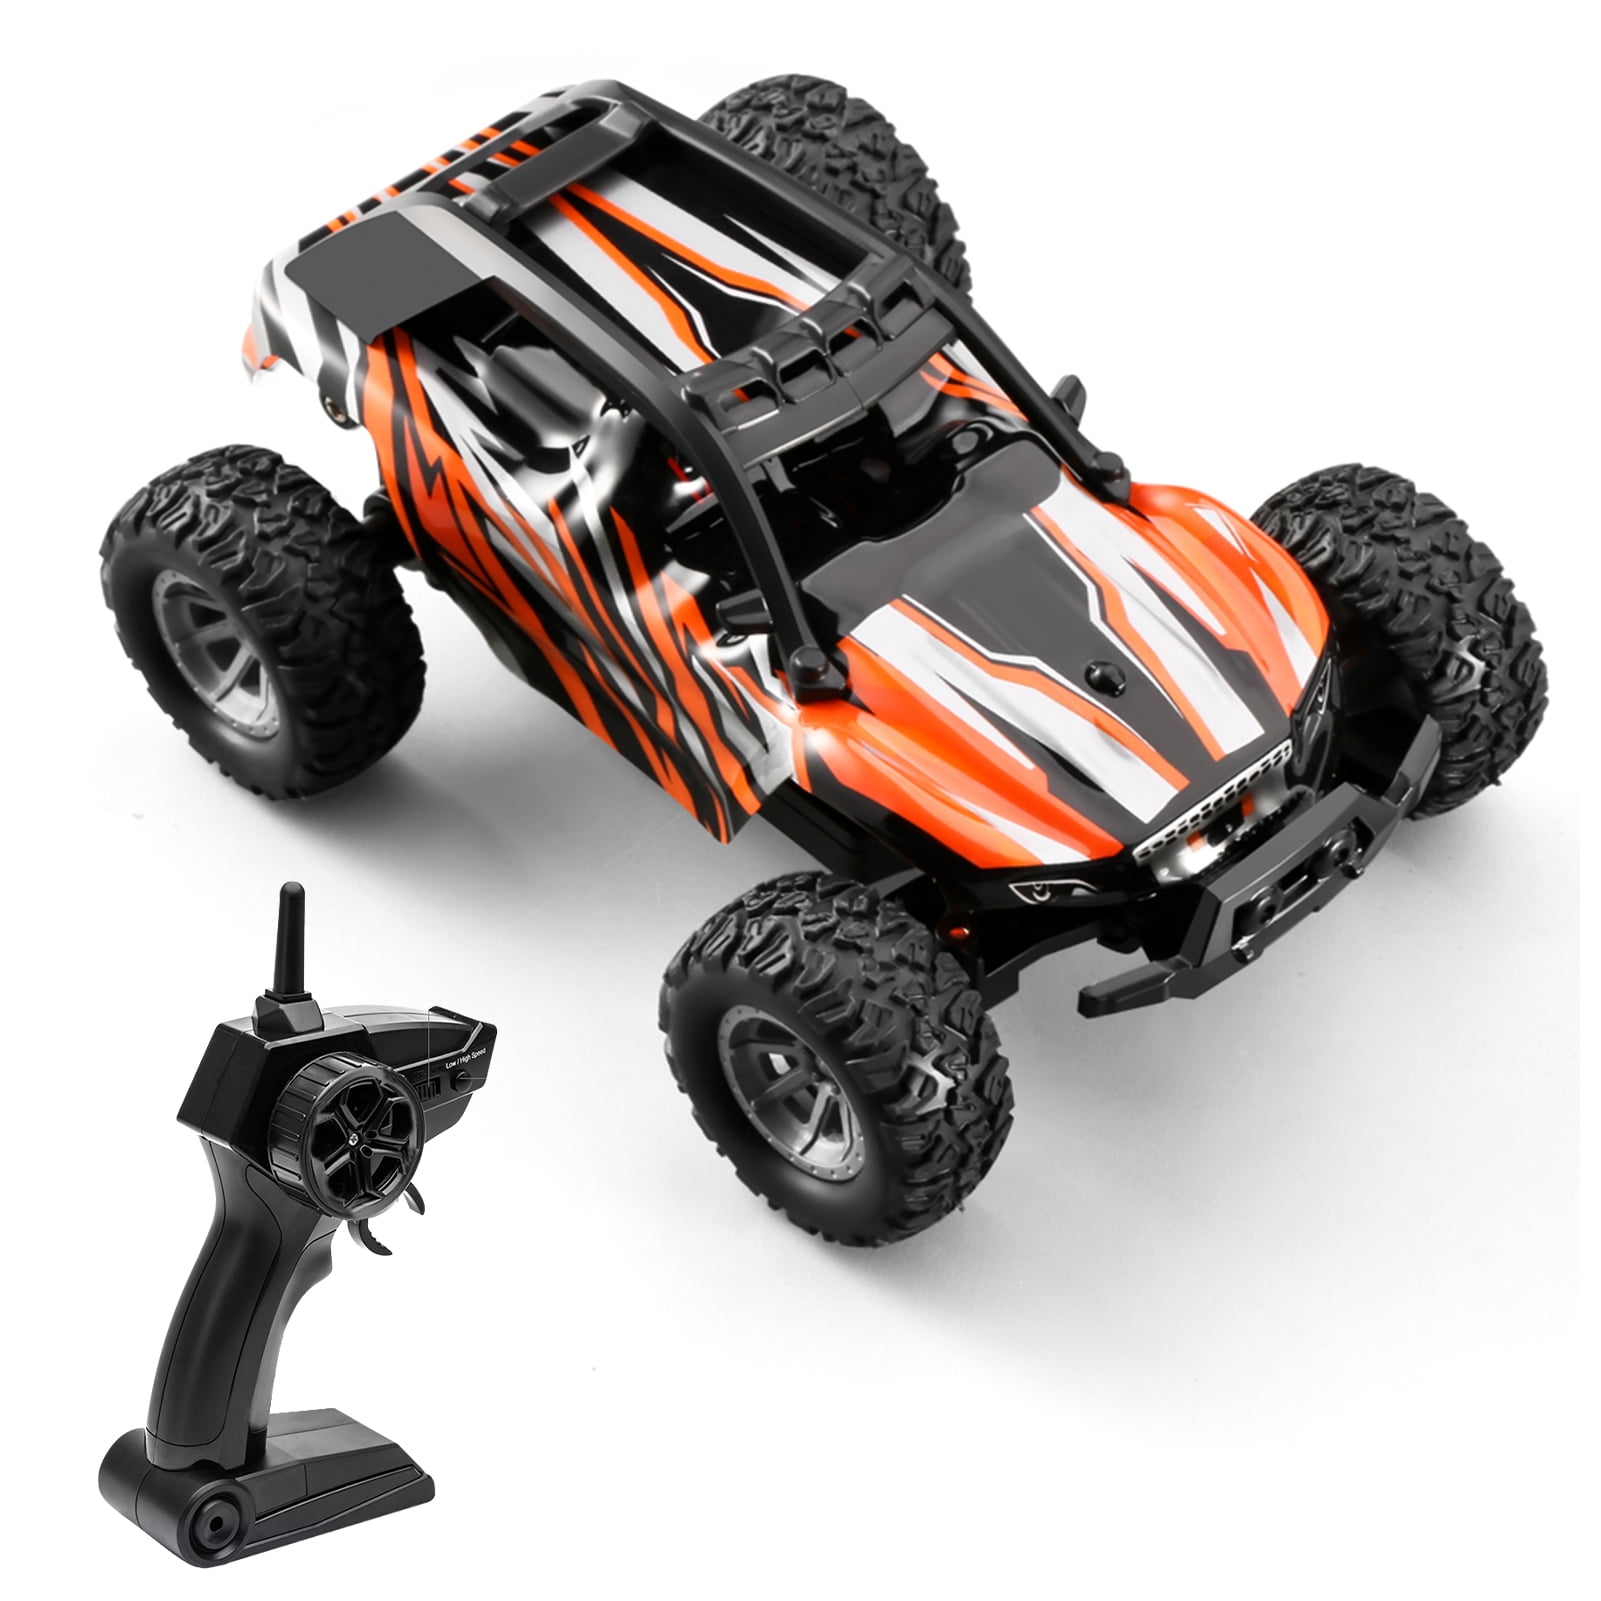 1:22   20km/h High Speed Brushless RC Car Racing Truck Buggy Toy For Kids 